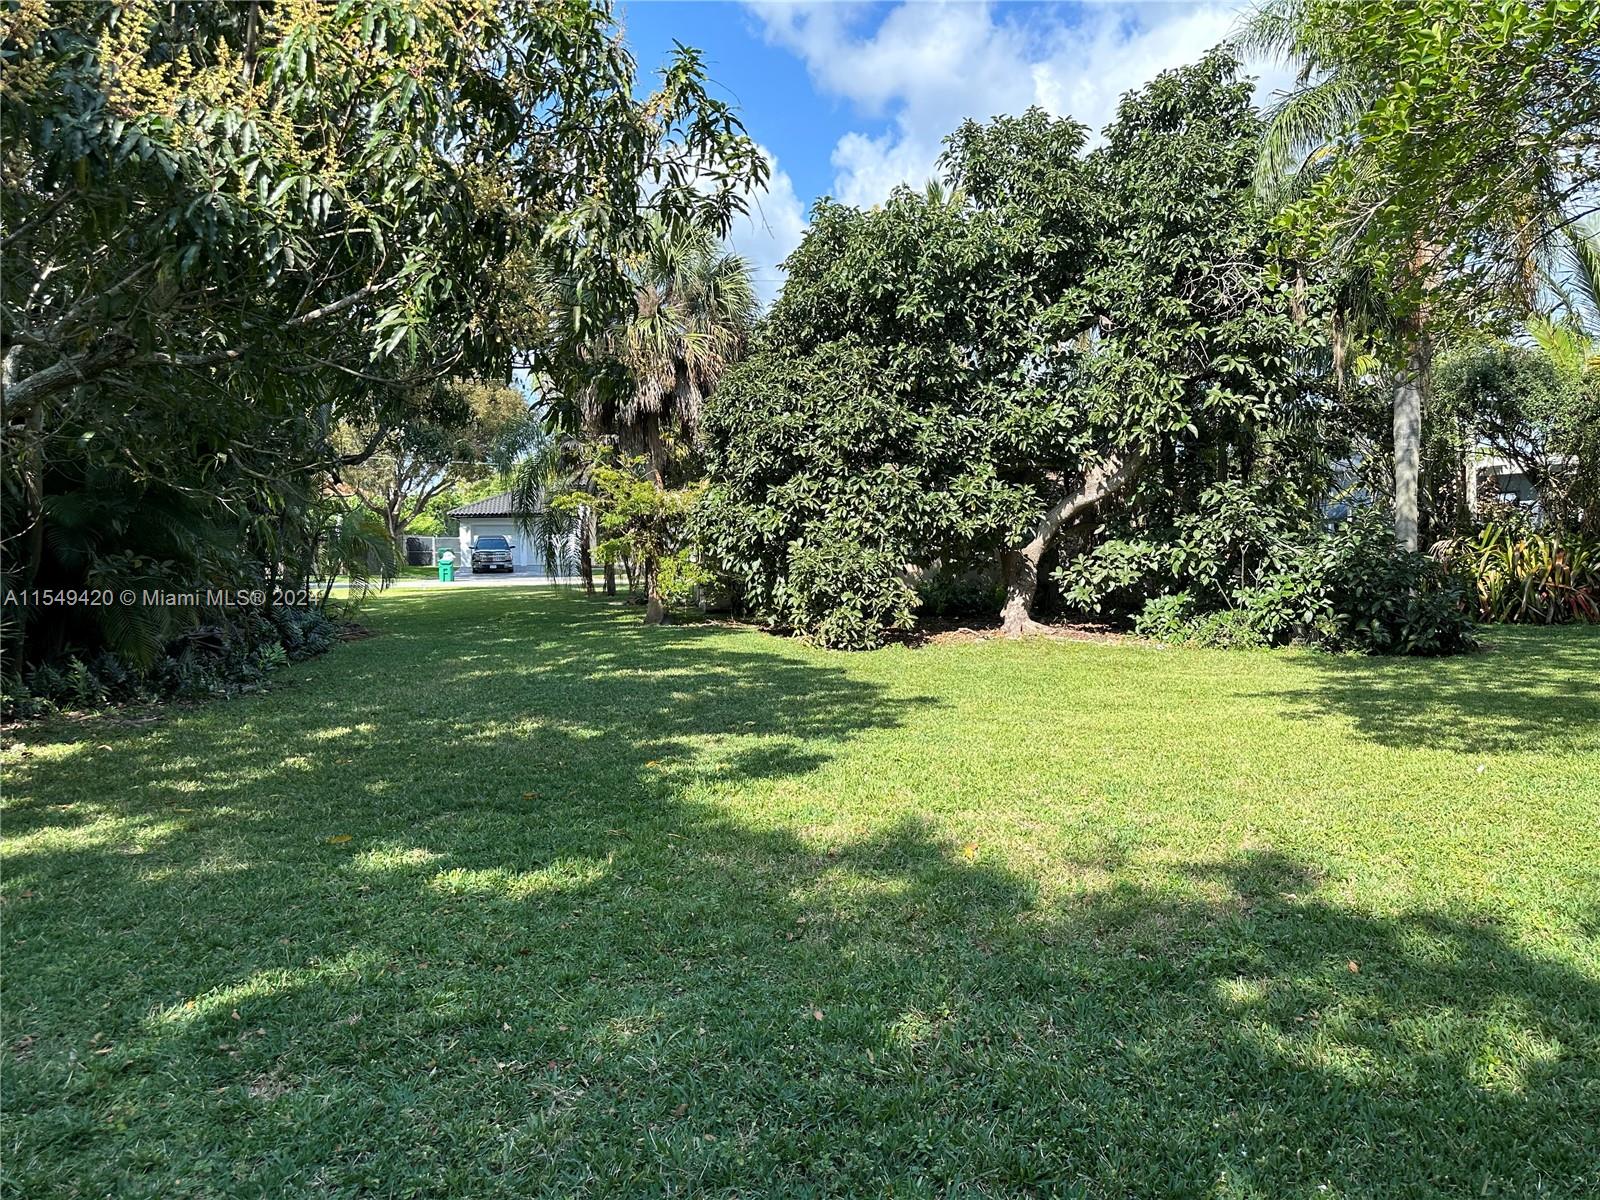 17391 SW 92nd Ct, Palmetto Bay, Florida, 33157, United States, 4 Bedrooms Bedrooms, ,2 BathroomsBathrooms,Residential,For Sale,17391 SW 92nd Ct,1487870